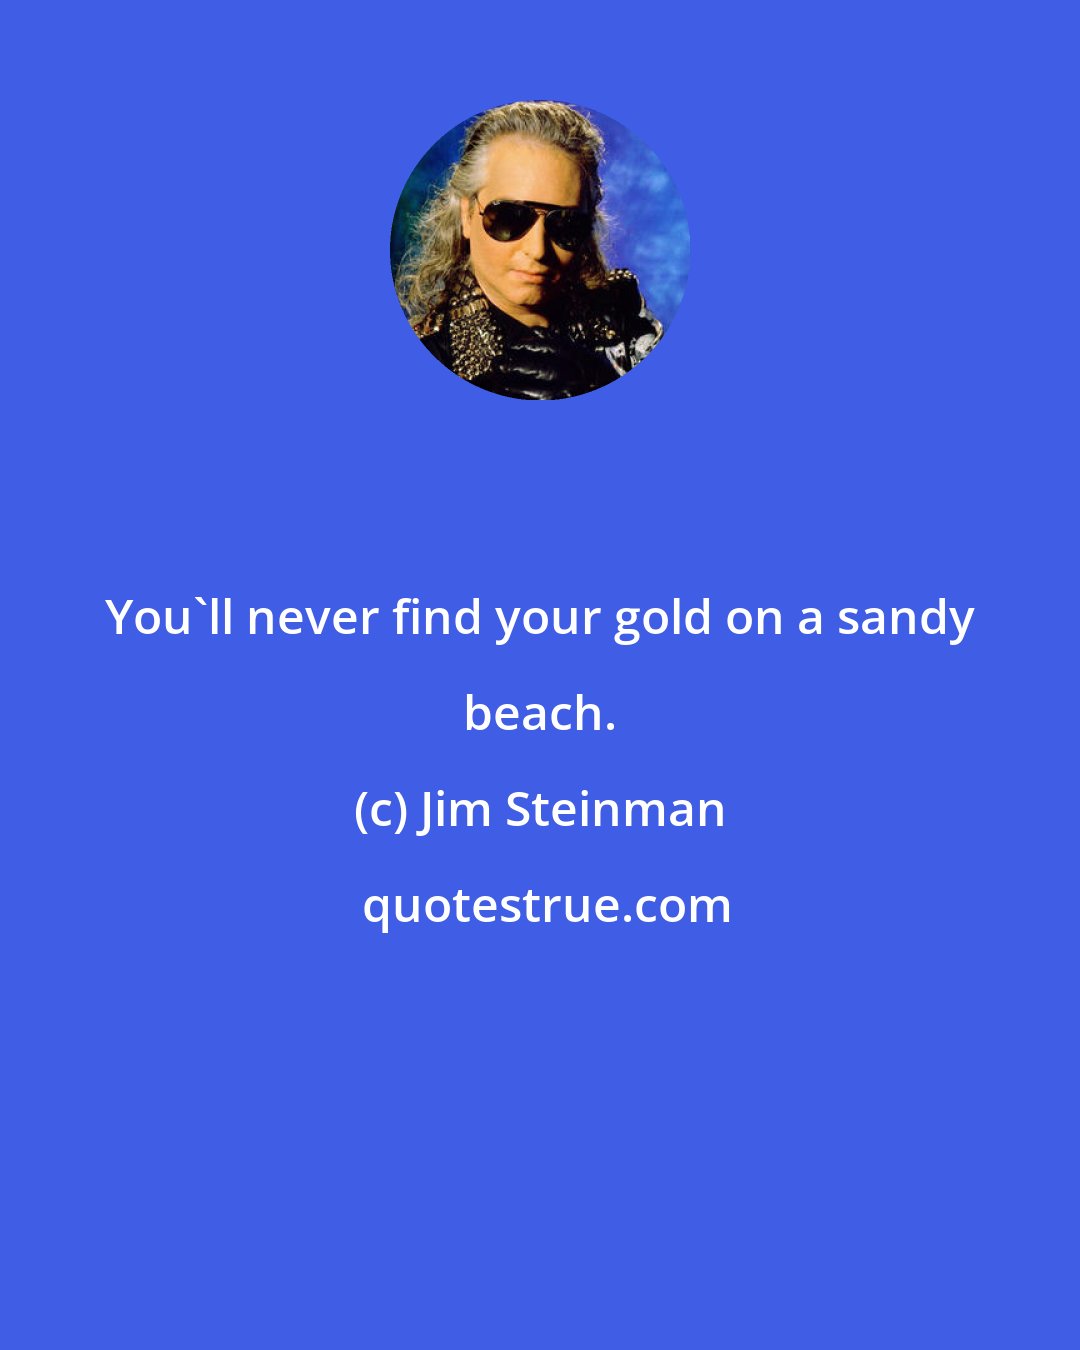 Jim Steinman: You'll never find your gold on a sandy beach.